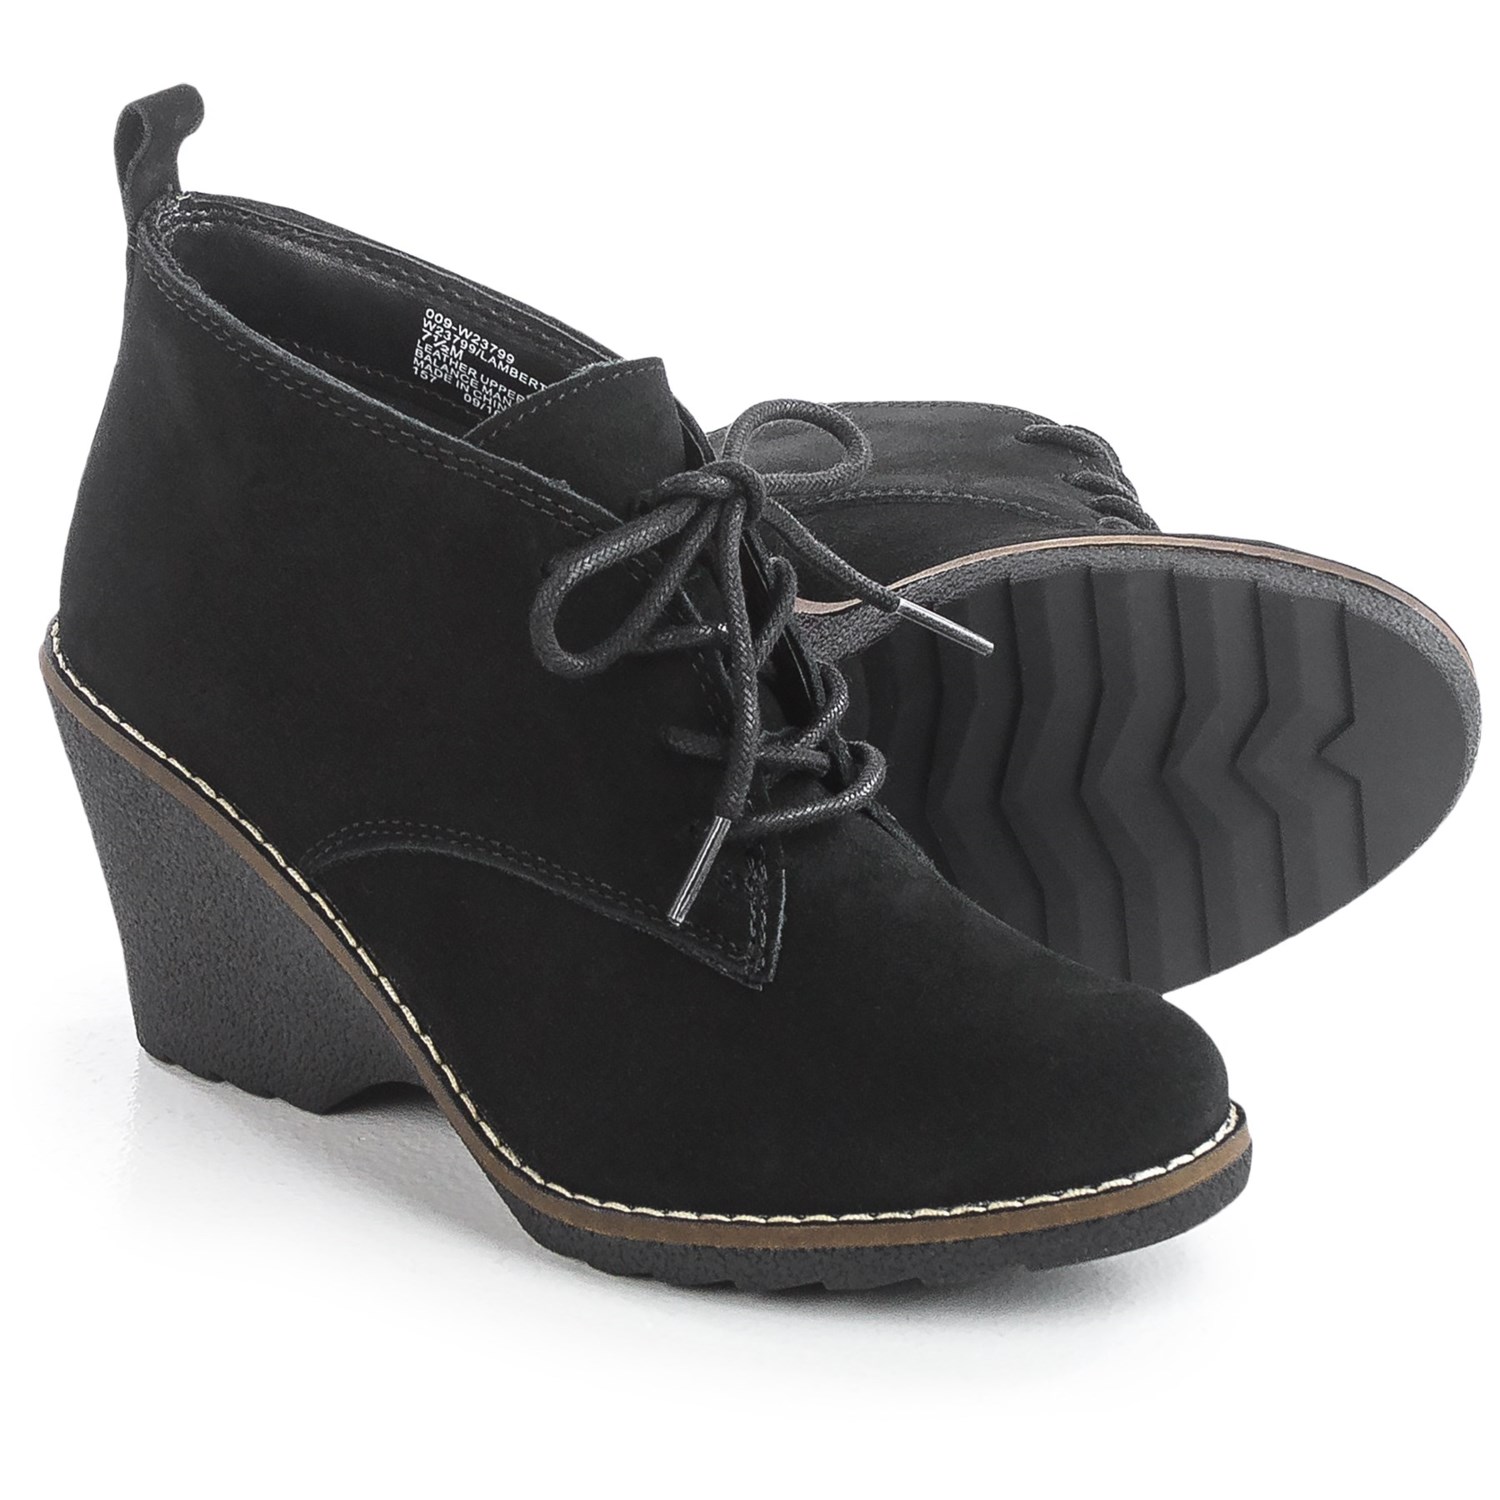 White Mountain Lambert Wedge Ankle Boots (For Women) - Save 55%